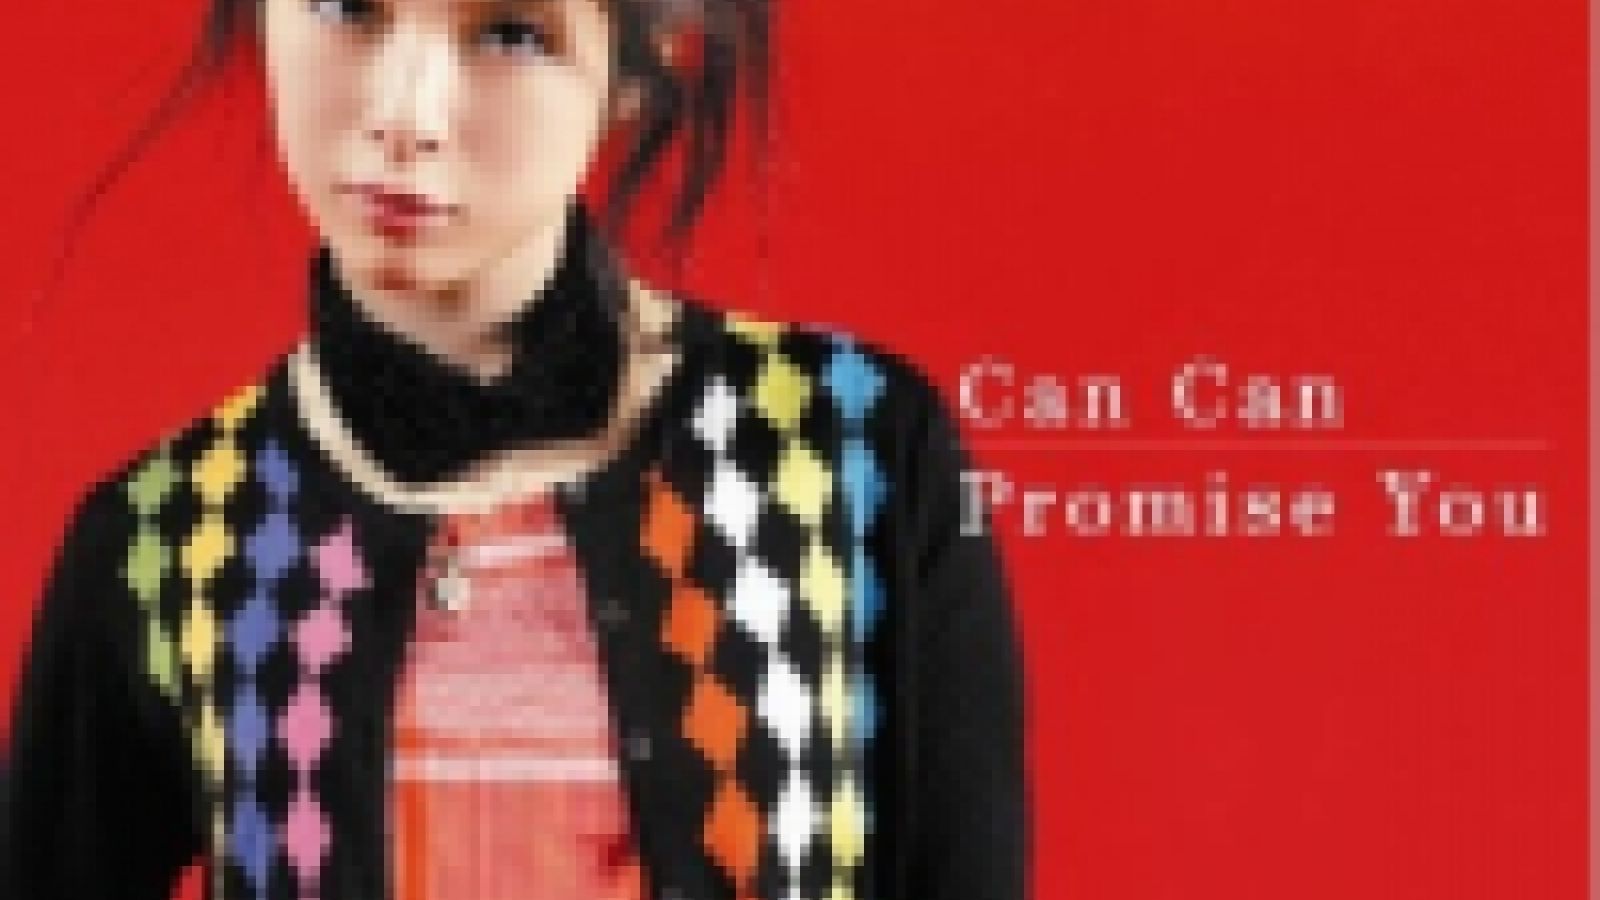 Fukui Mai - Can Can/Promise You © JaME